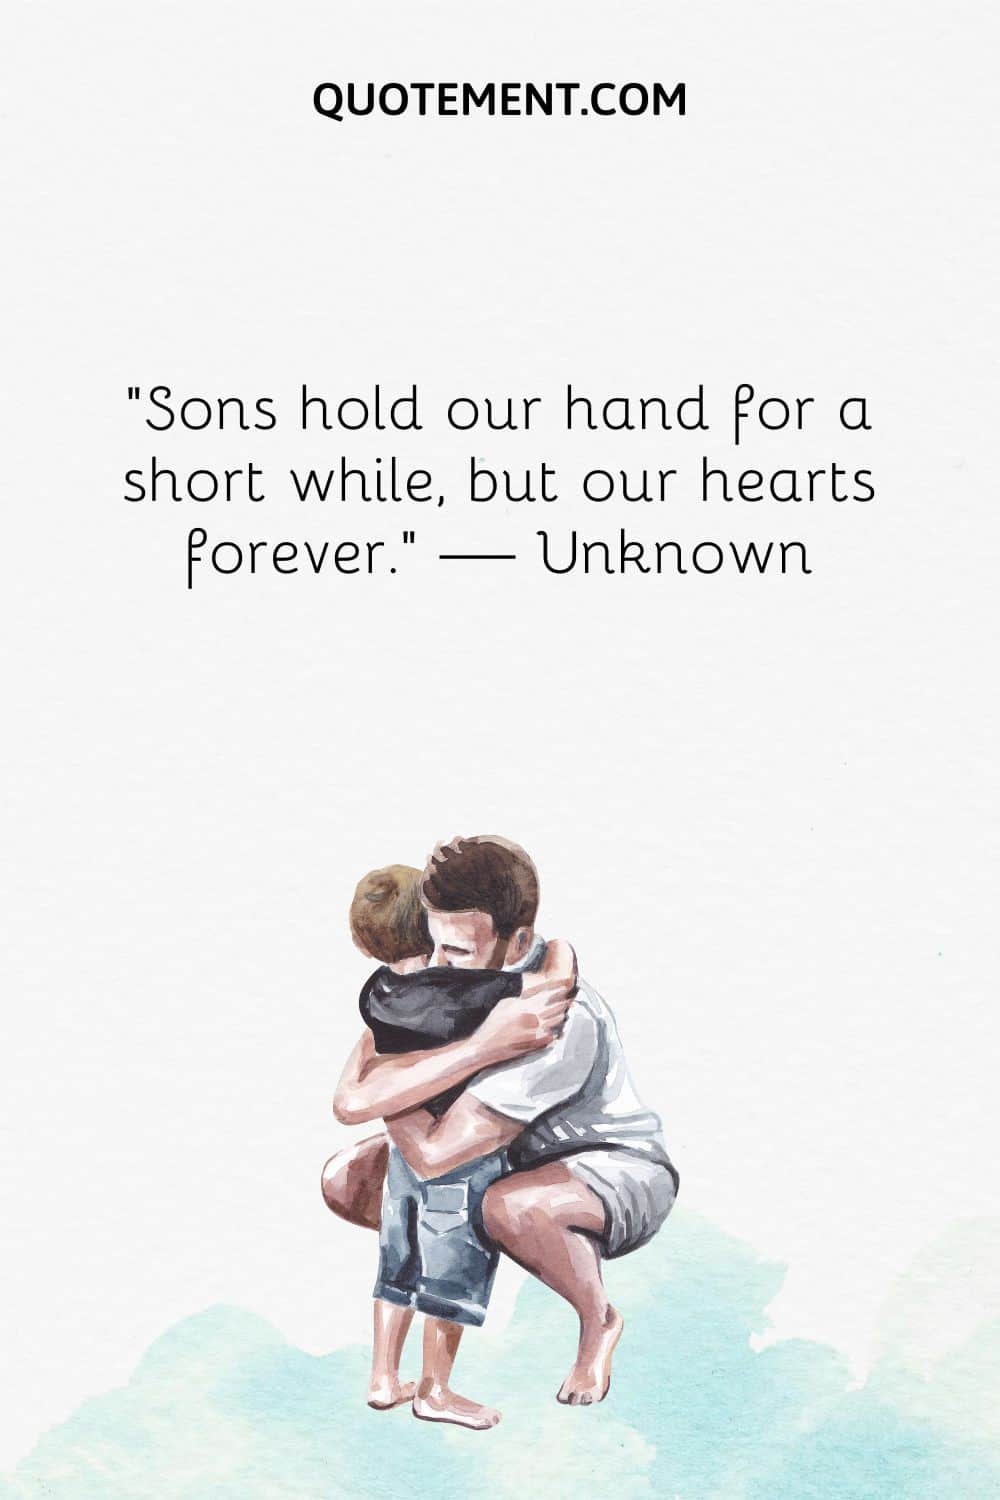 Sons hold our hand for a short while, but our hearts forever